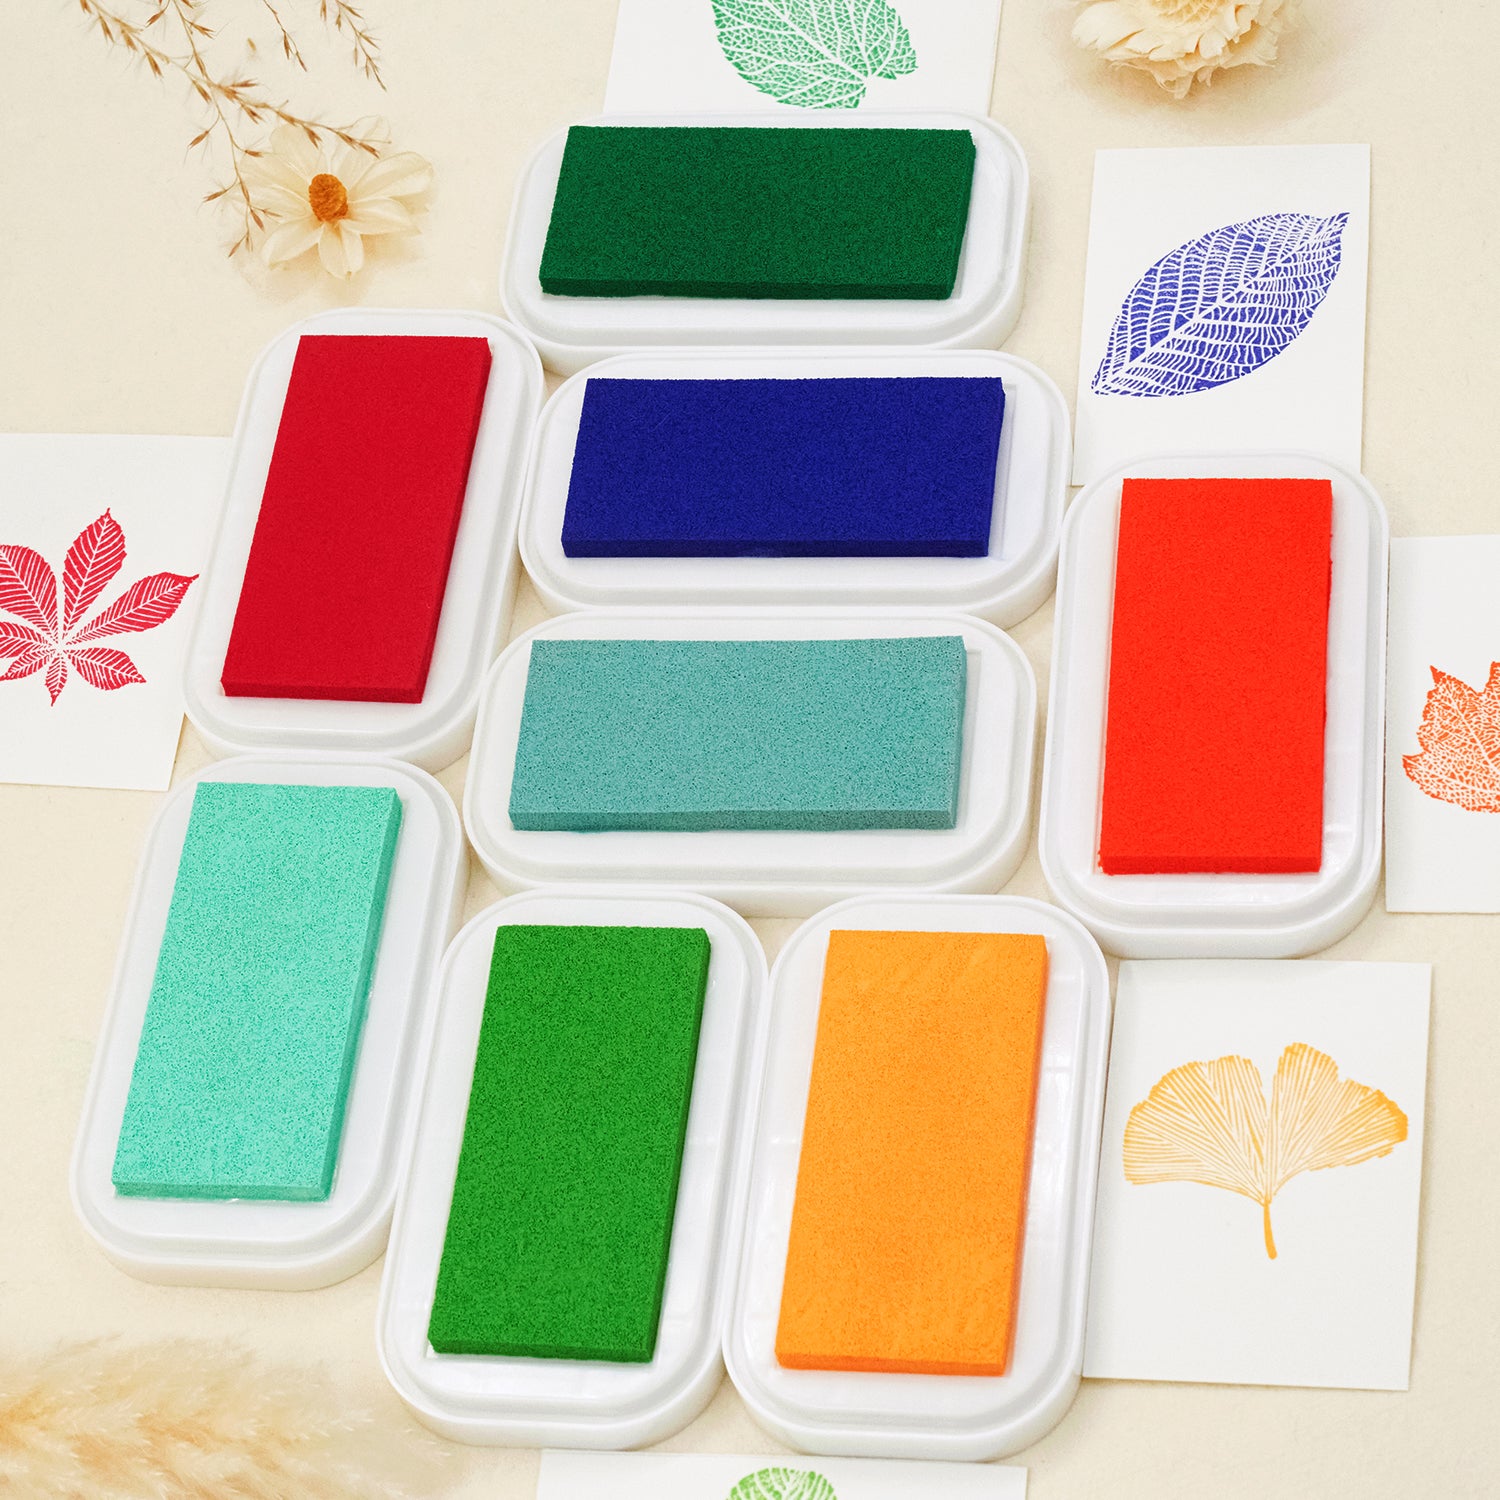 Stamp Pads and Ink Pads for Rubber Stamps